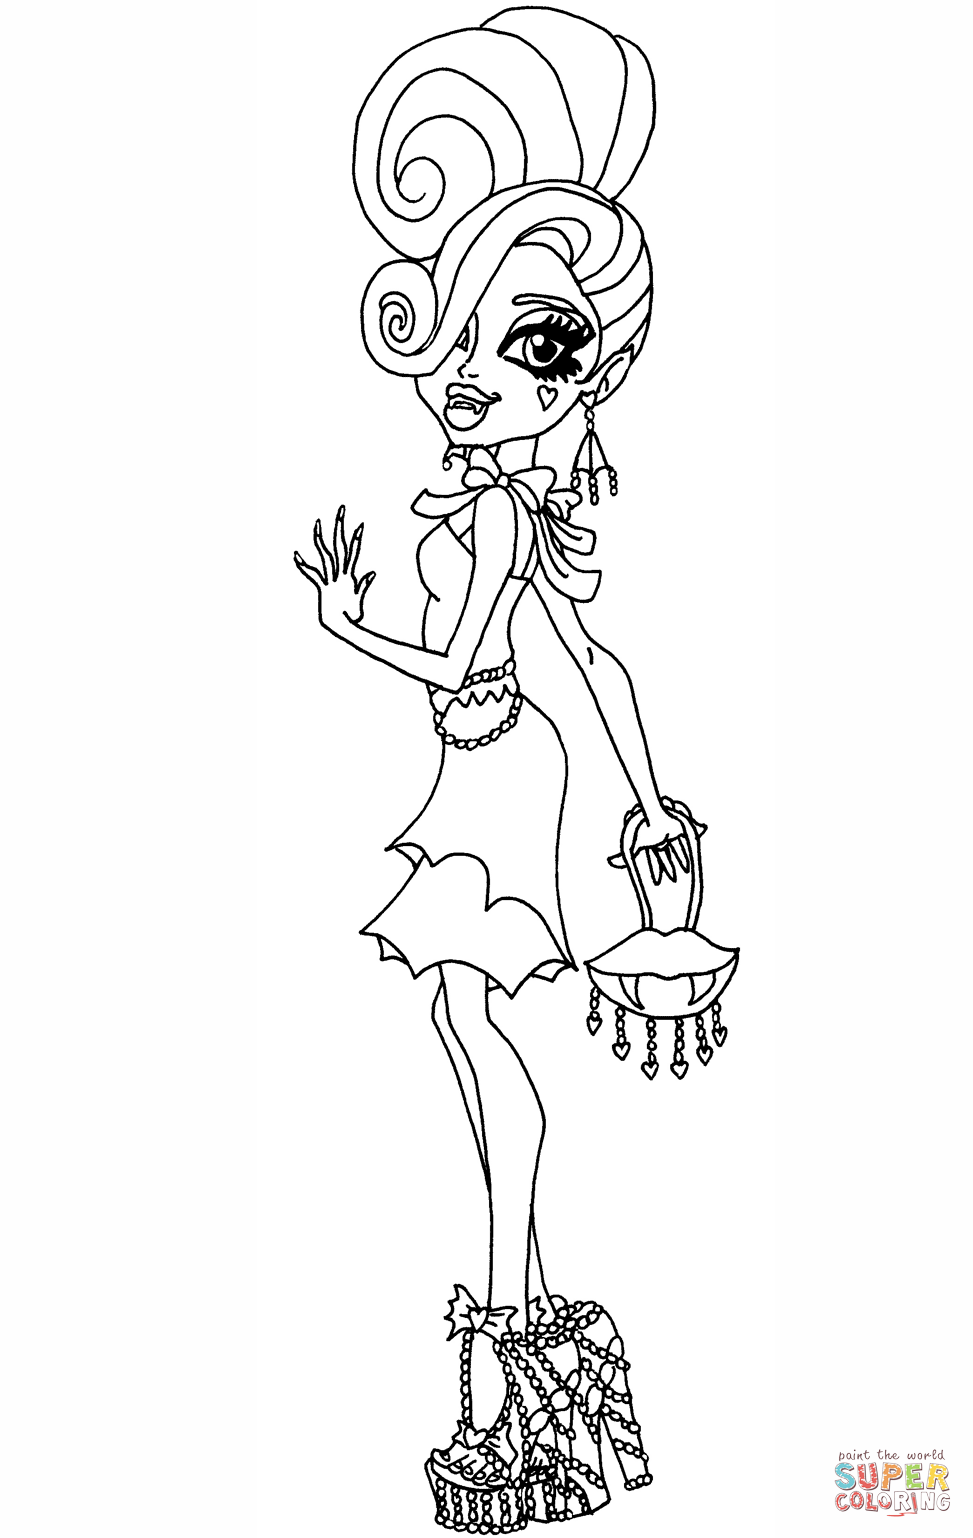 Frights camera action draculaura doll coloring page free printable coloring pages